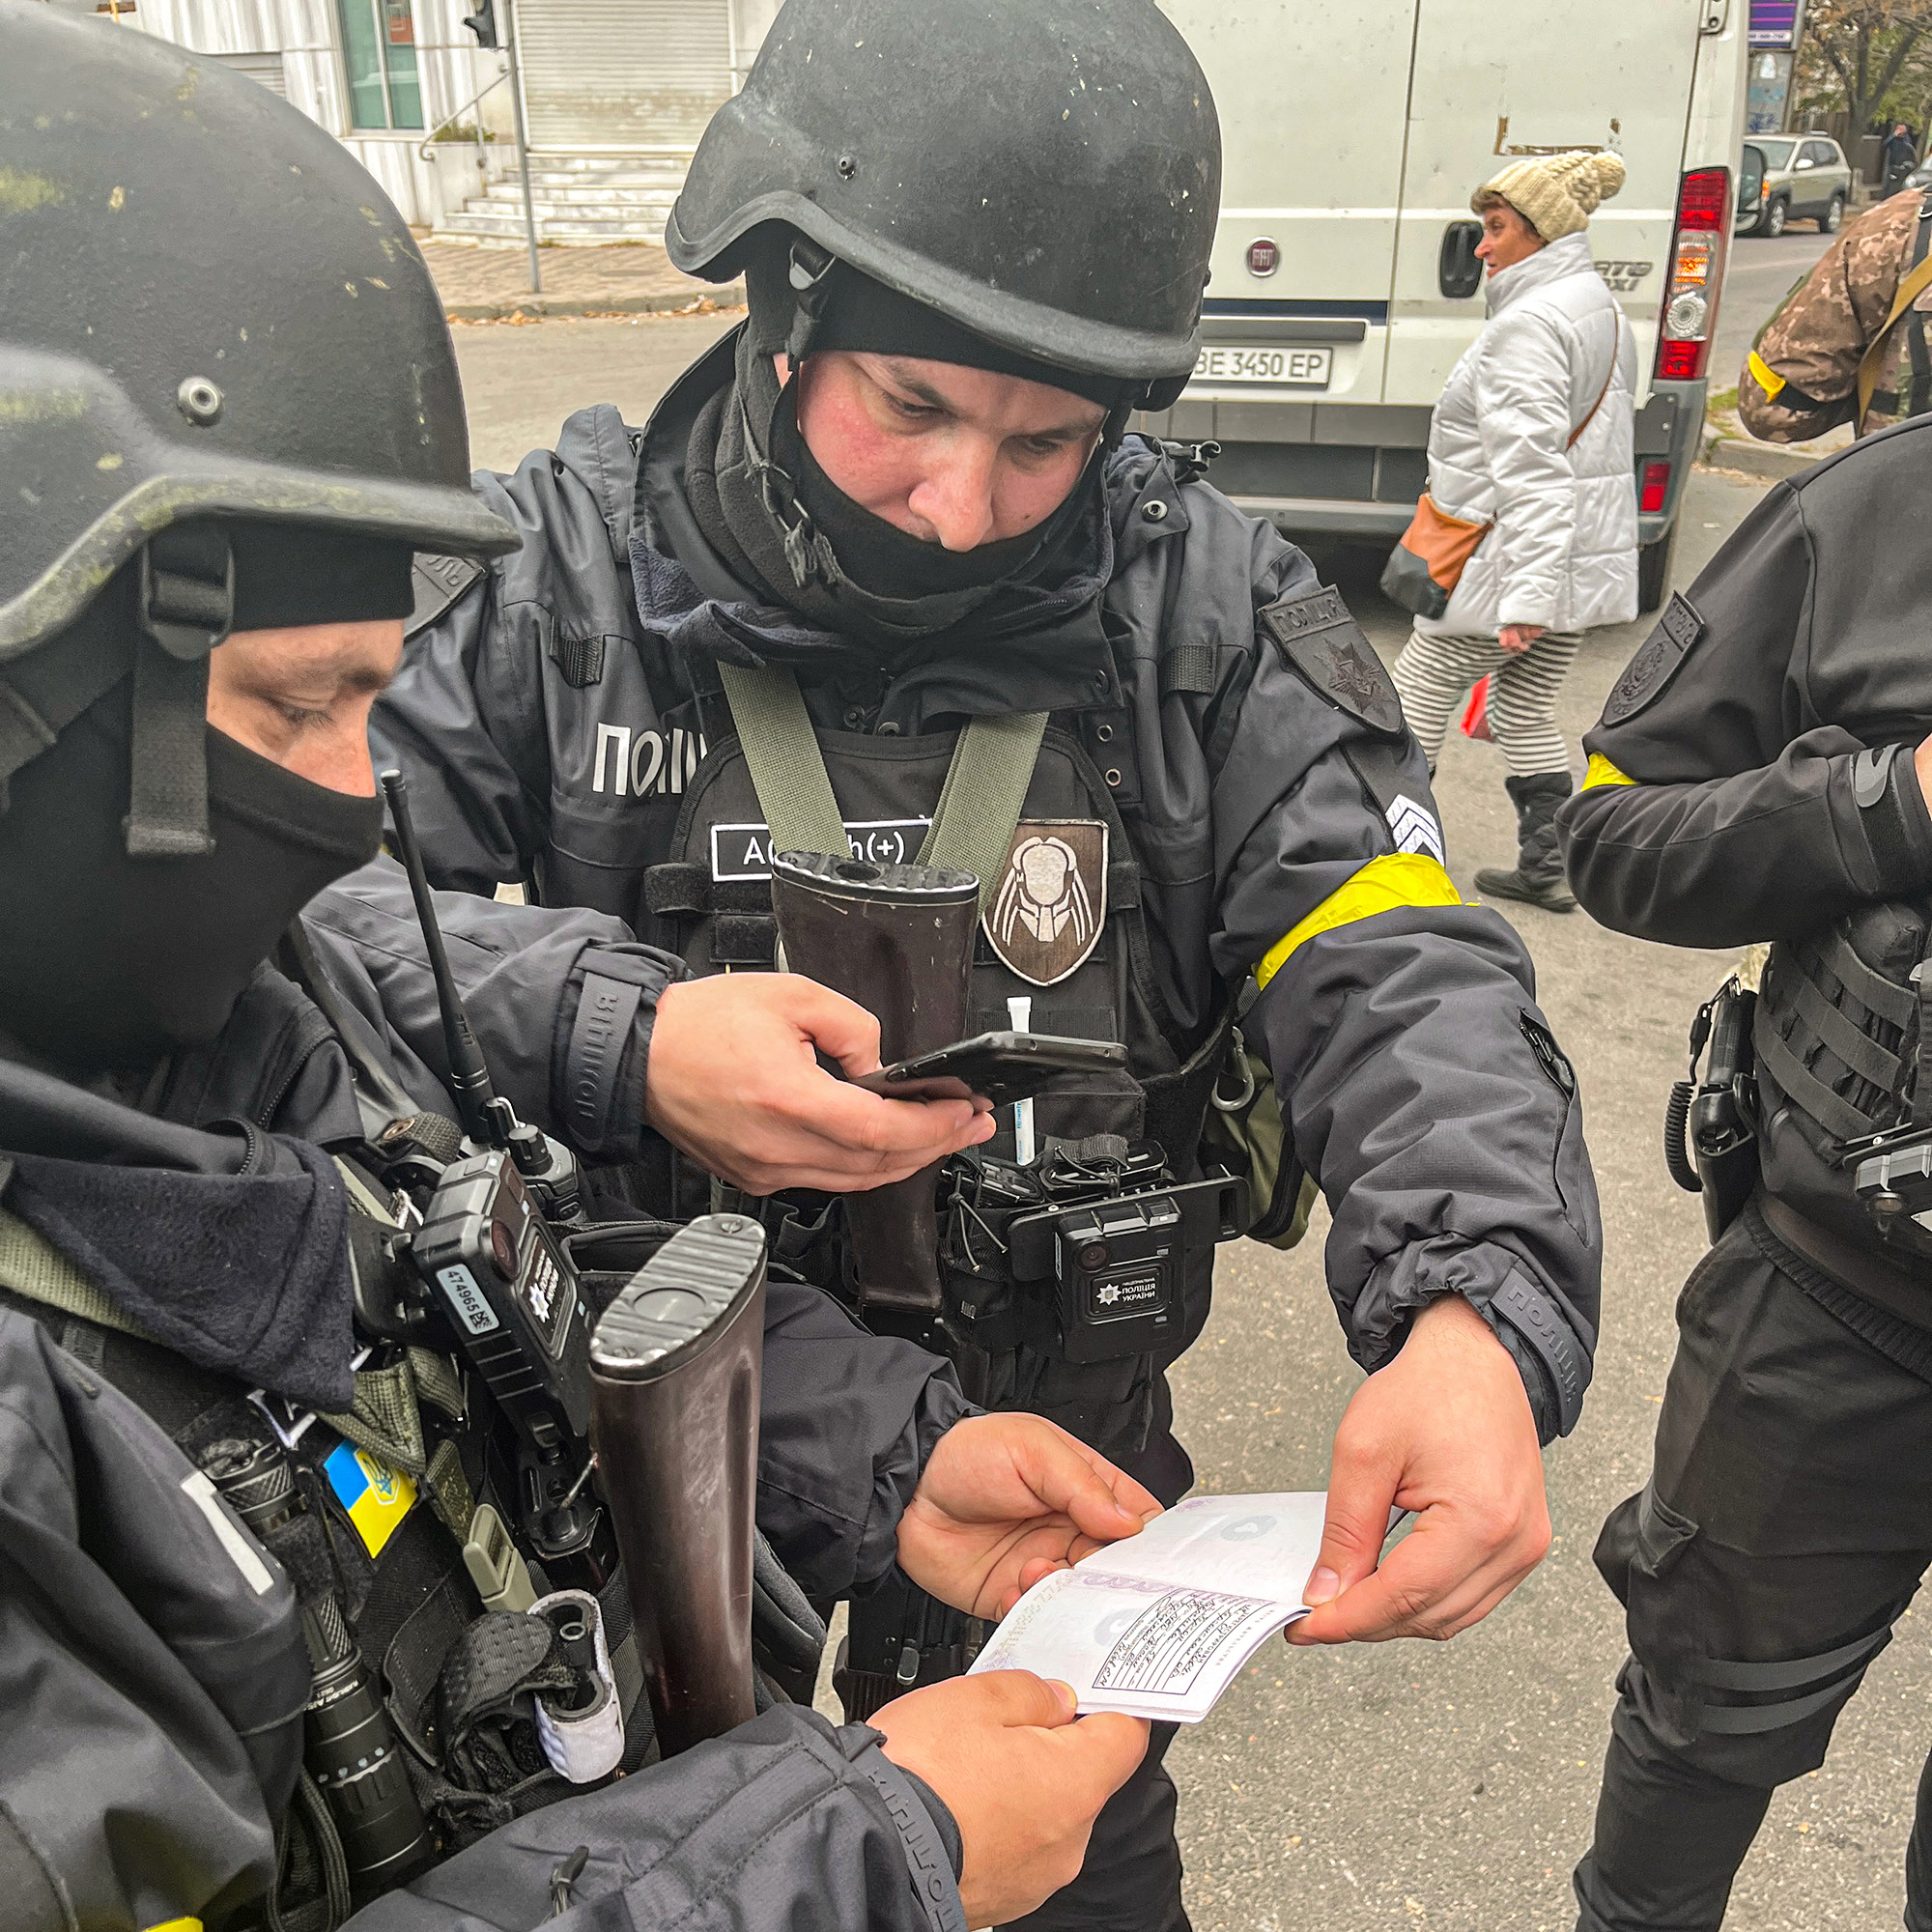 Ukrainian_Security_Checking_Papers_2000x2000.jpg